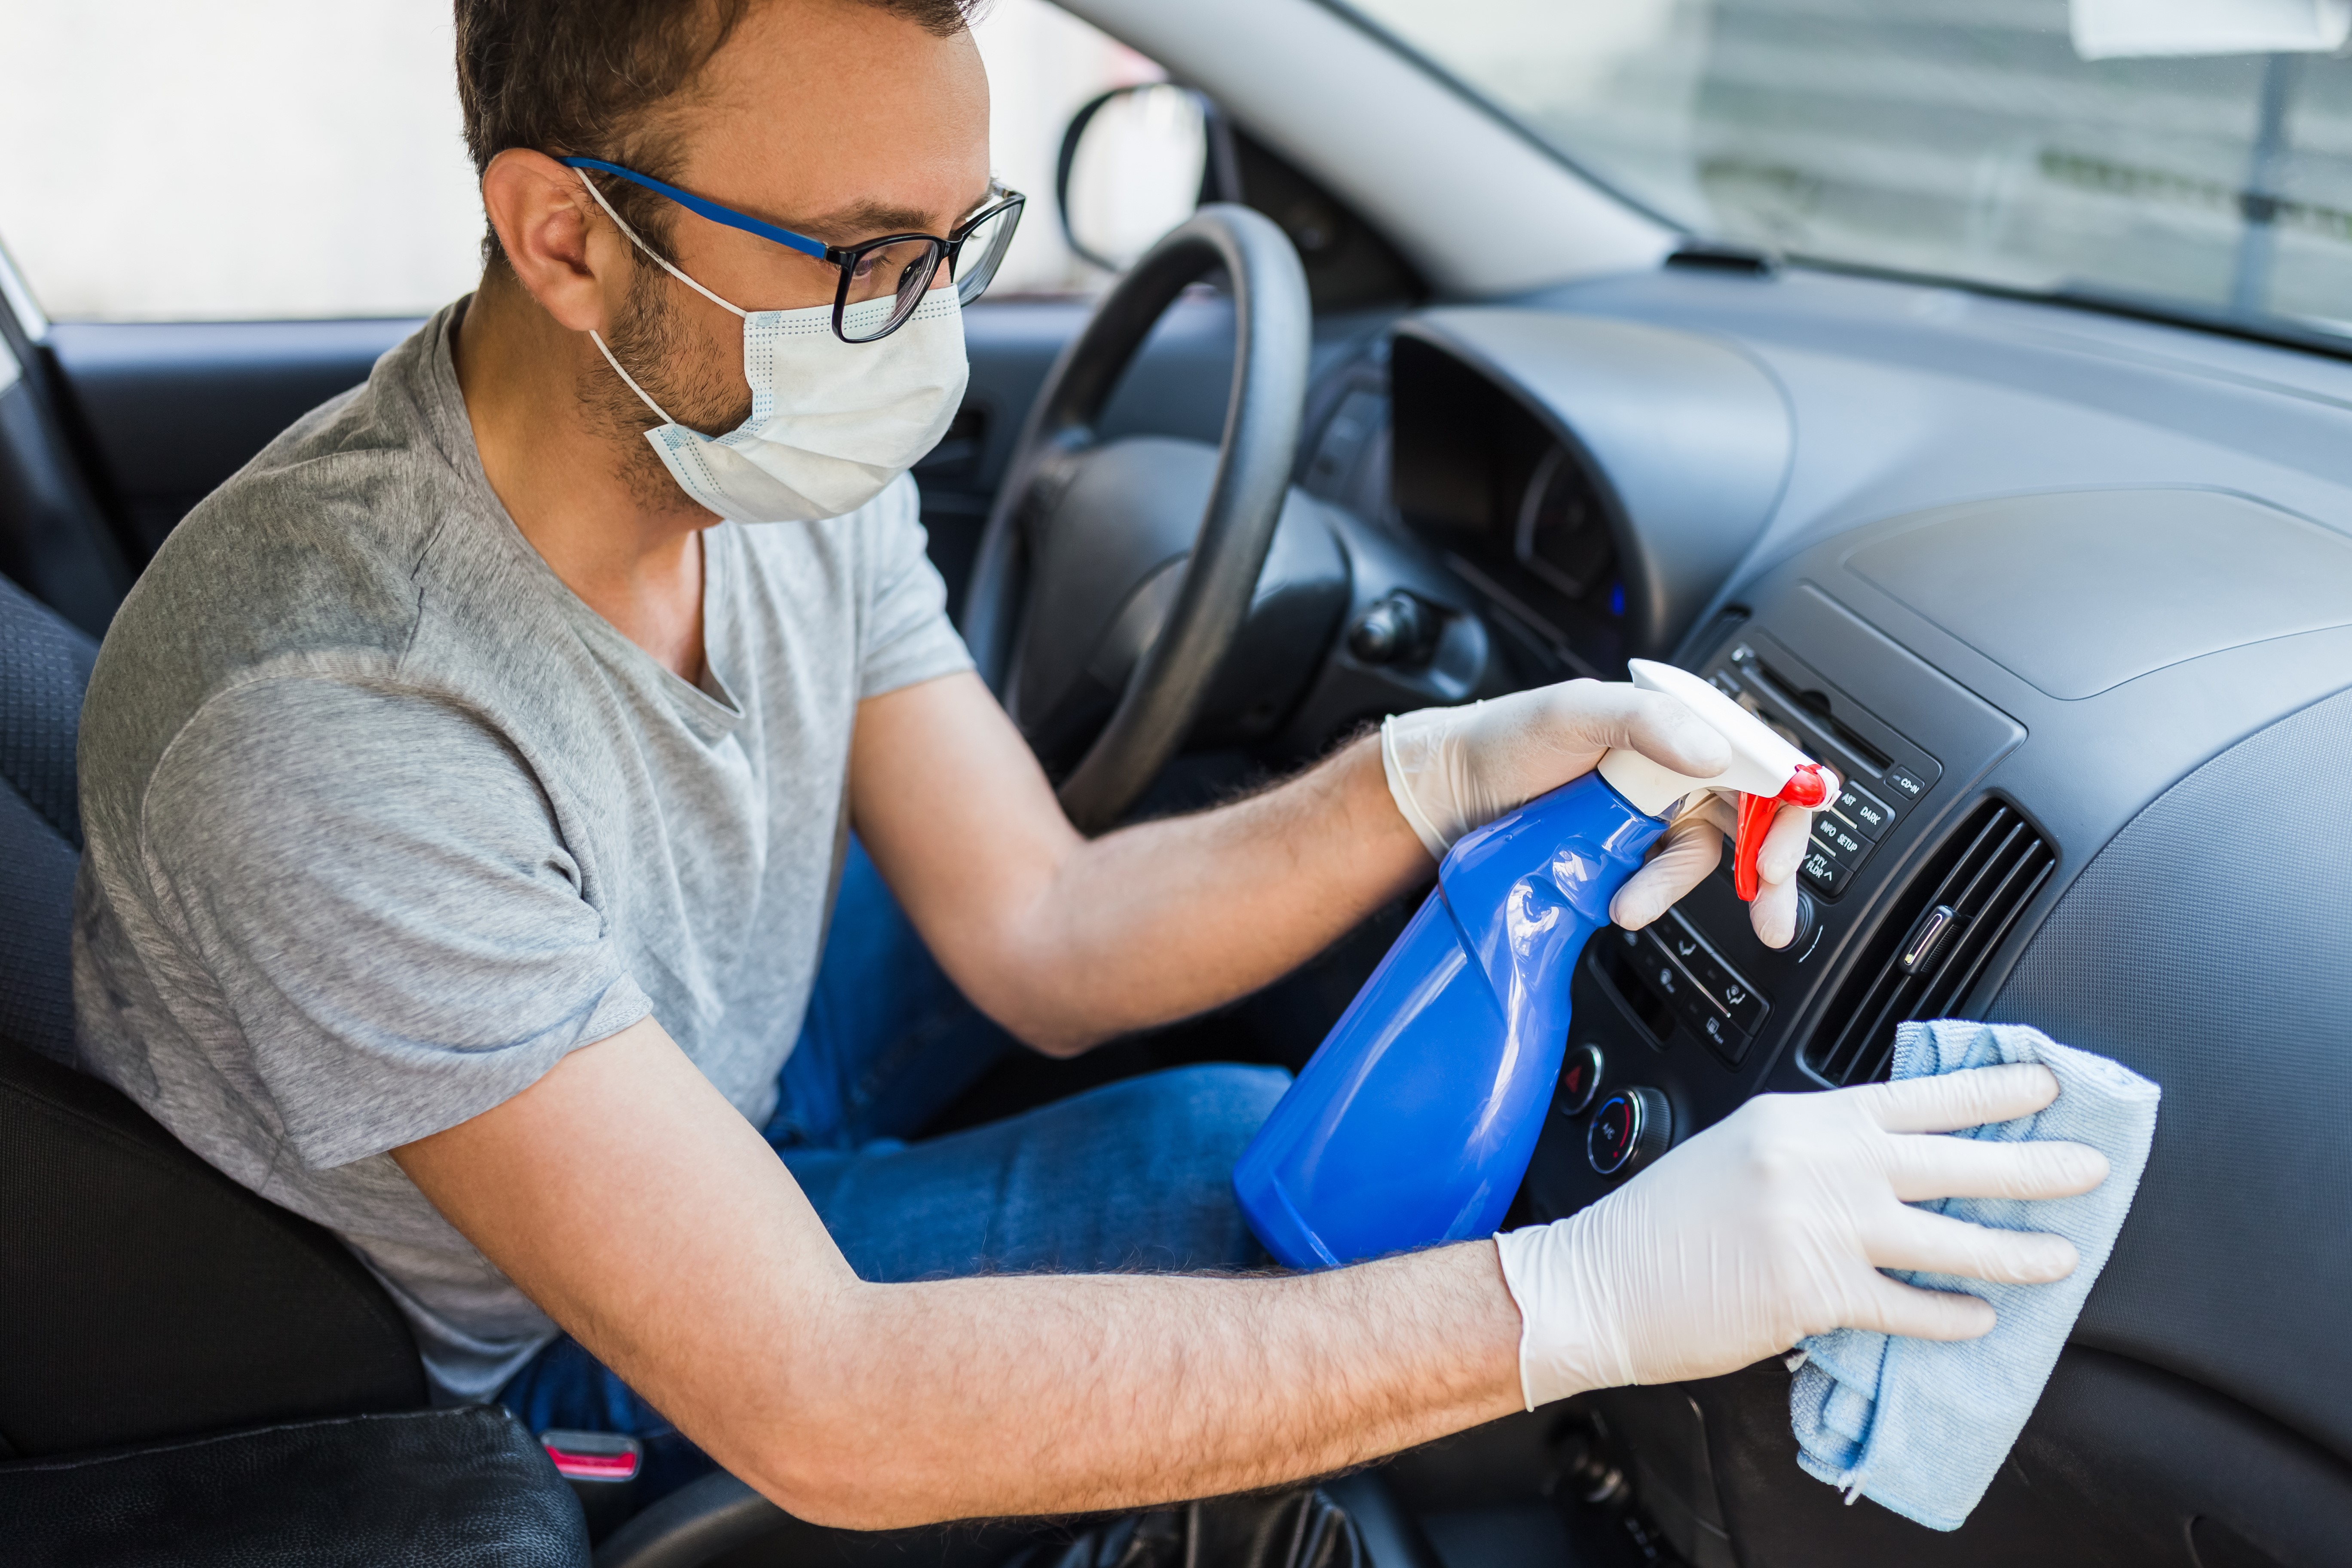 Car Sanitization and Cleaning Best Practices When Cleaning Your Customers’ Cars